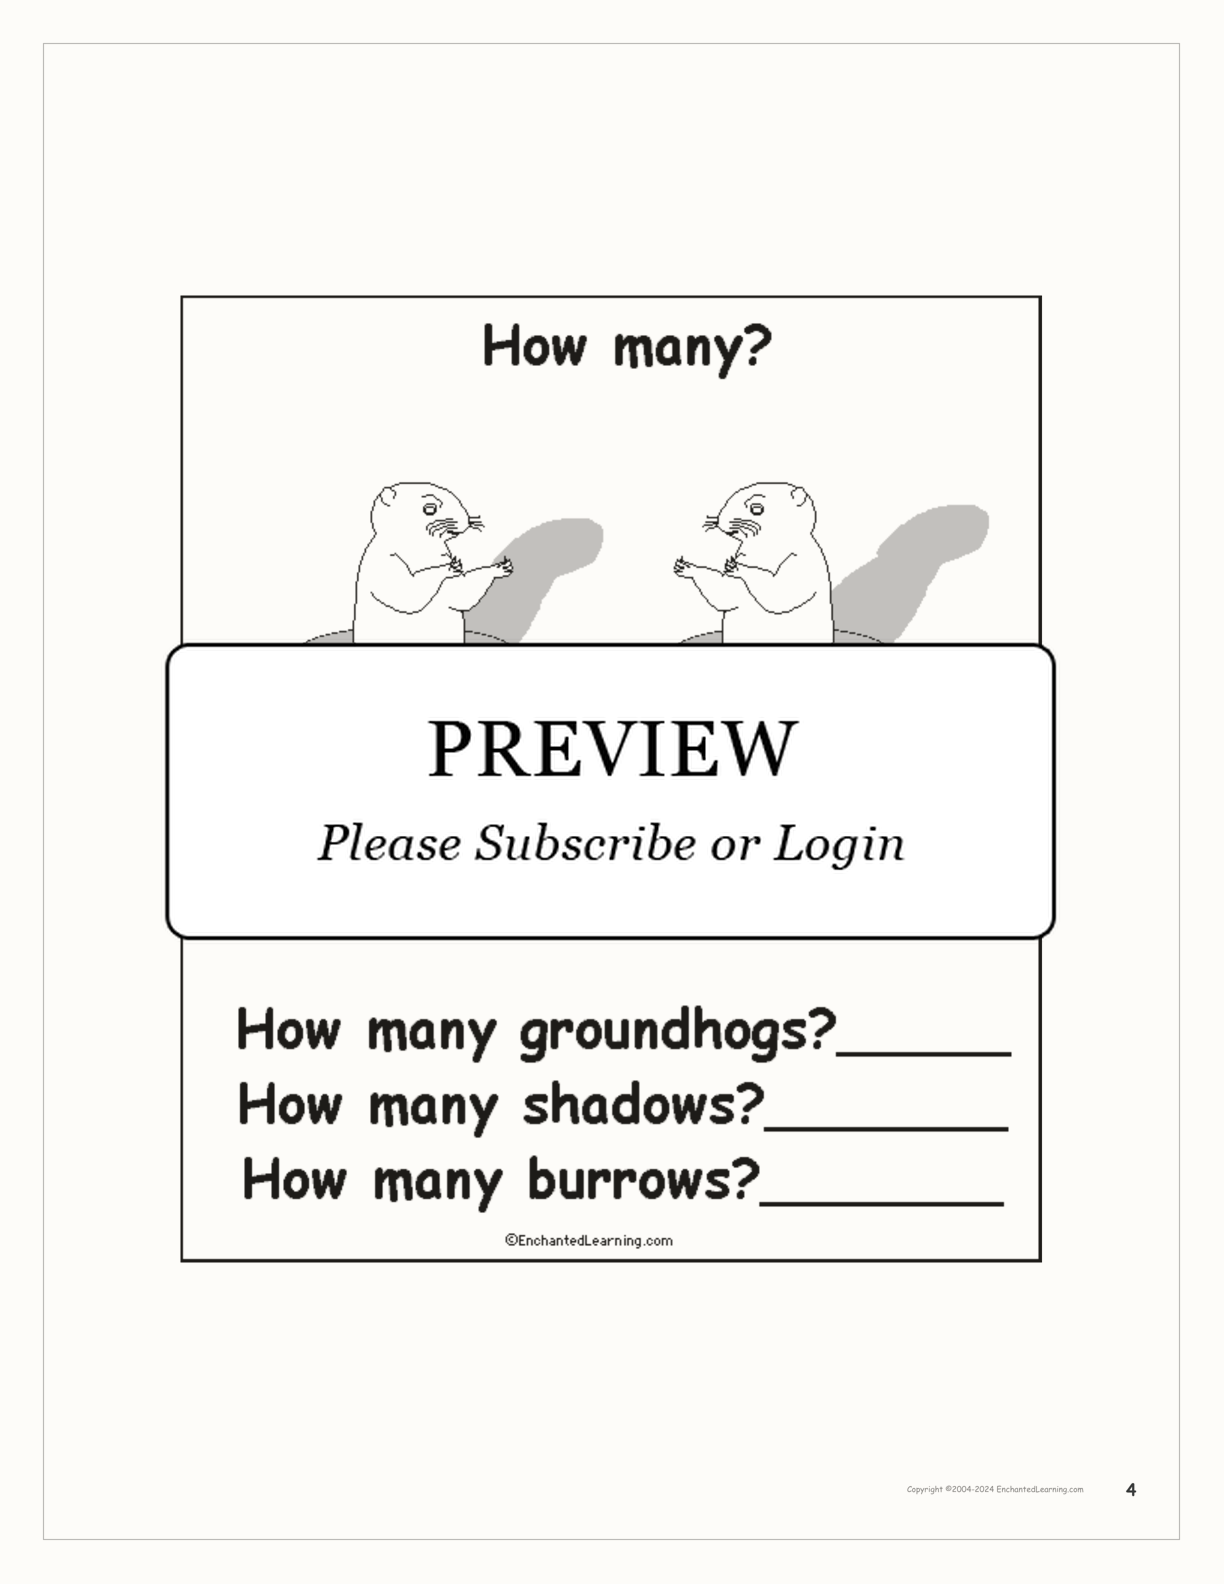 'Groundhog Day: How Many?' interactive worksheet page 4